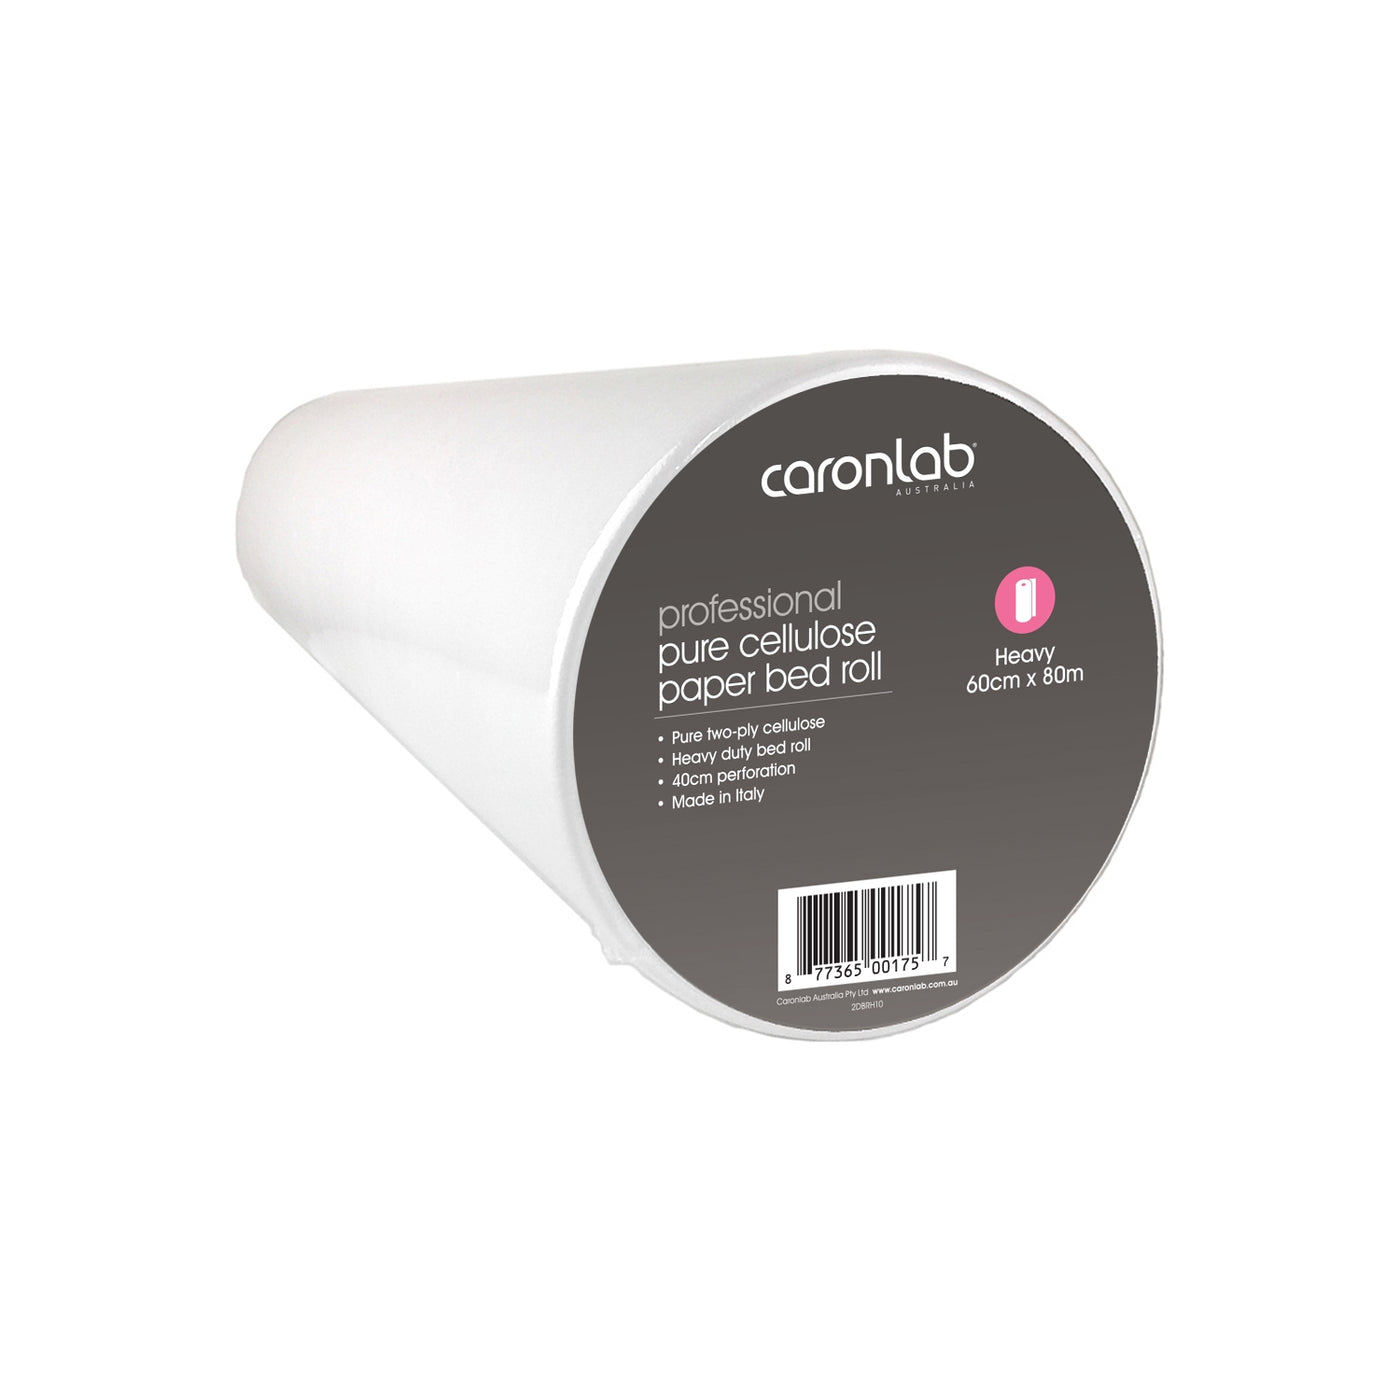 Caronlab Pure Cellulose Paper Bed Roll Heavy 60cm x 80m